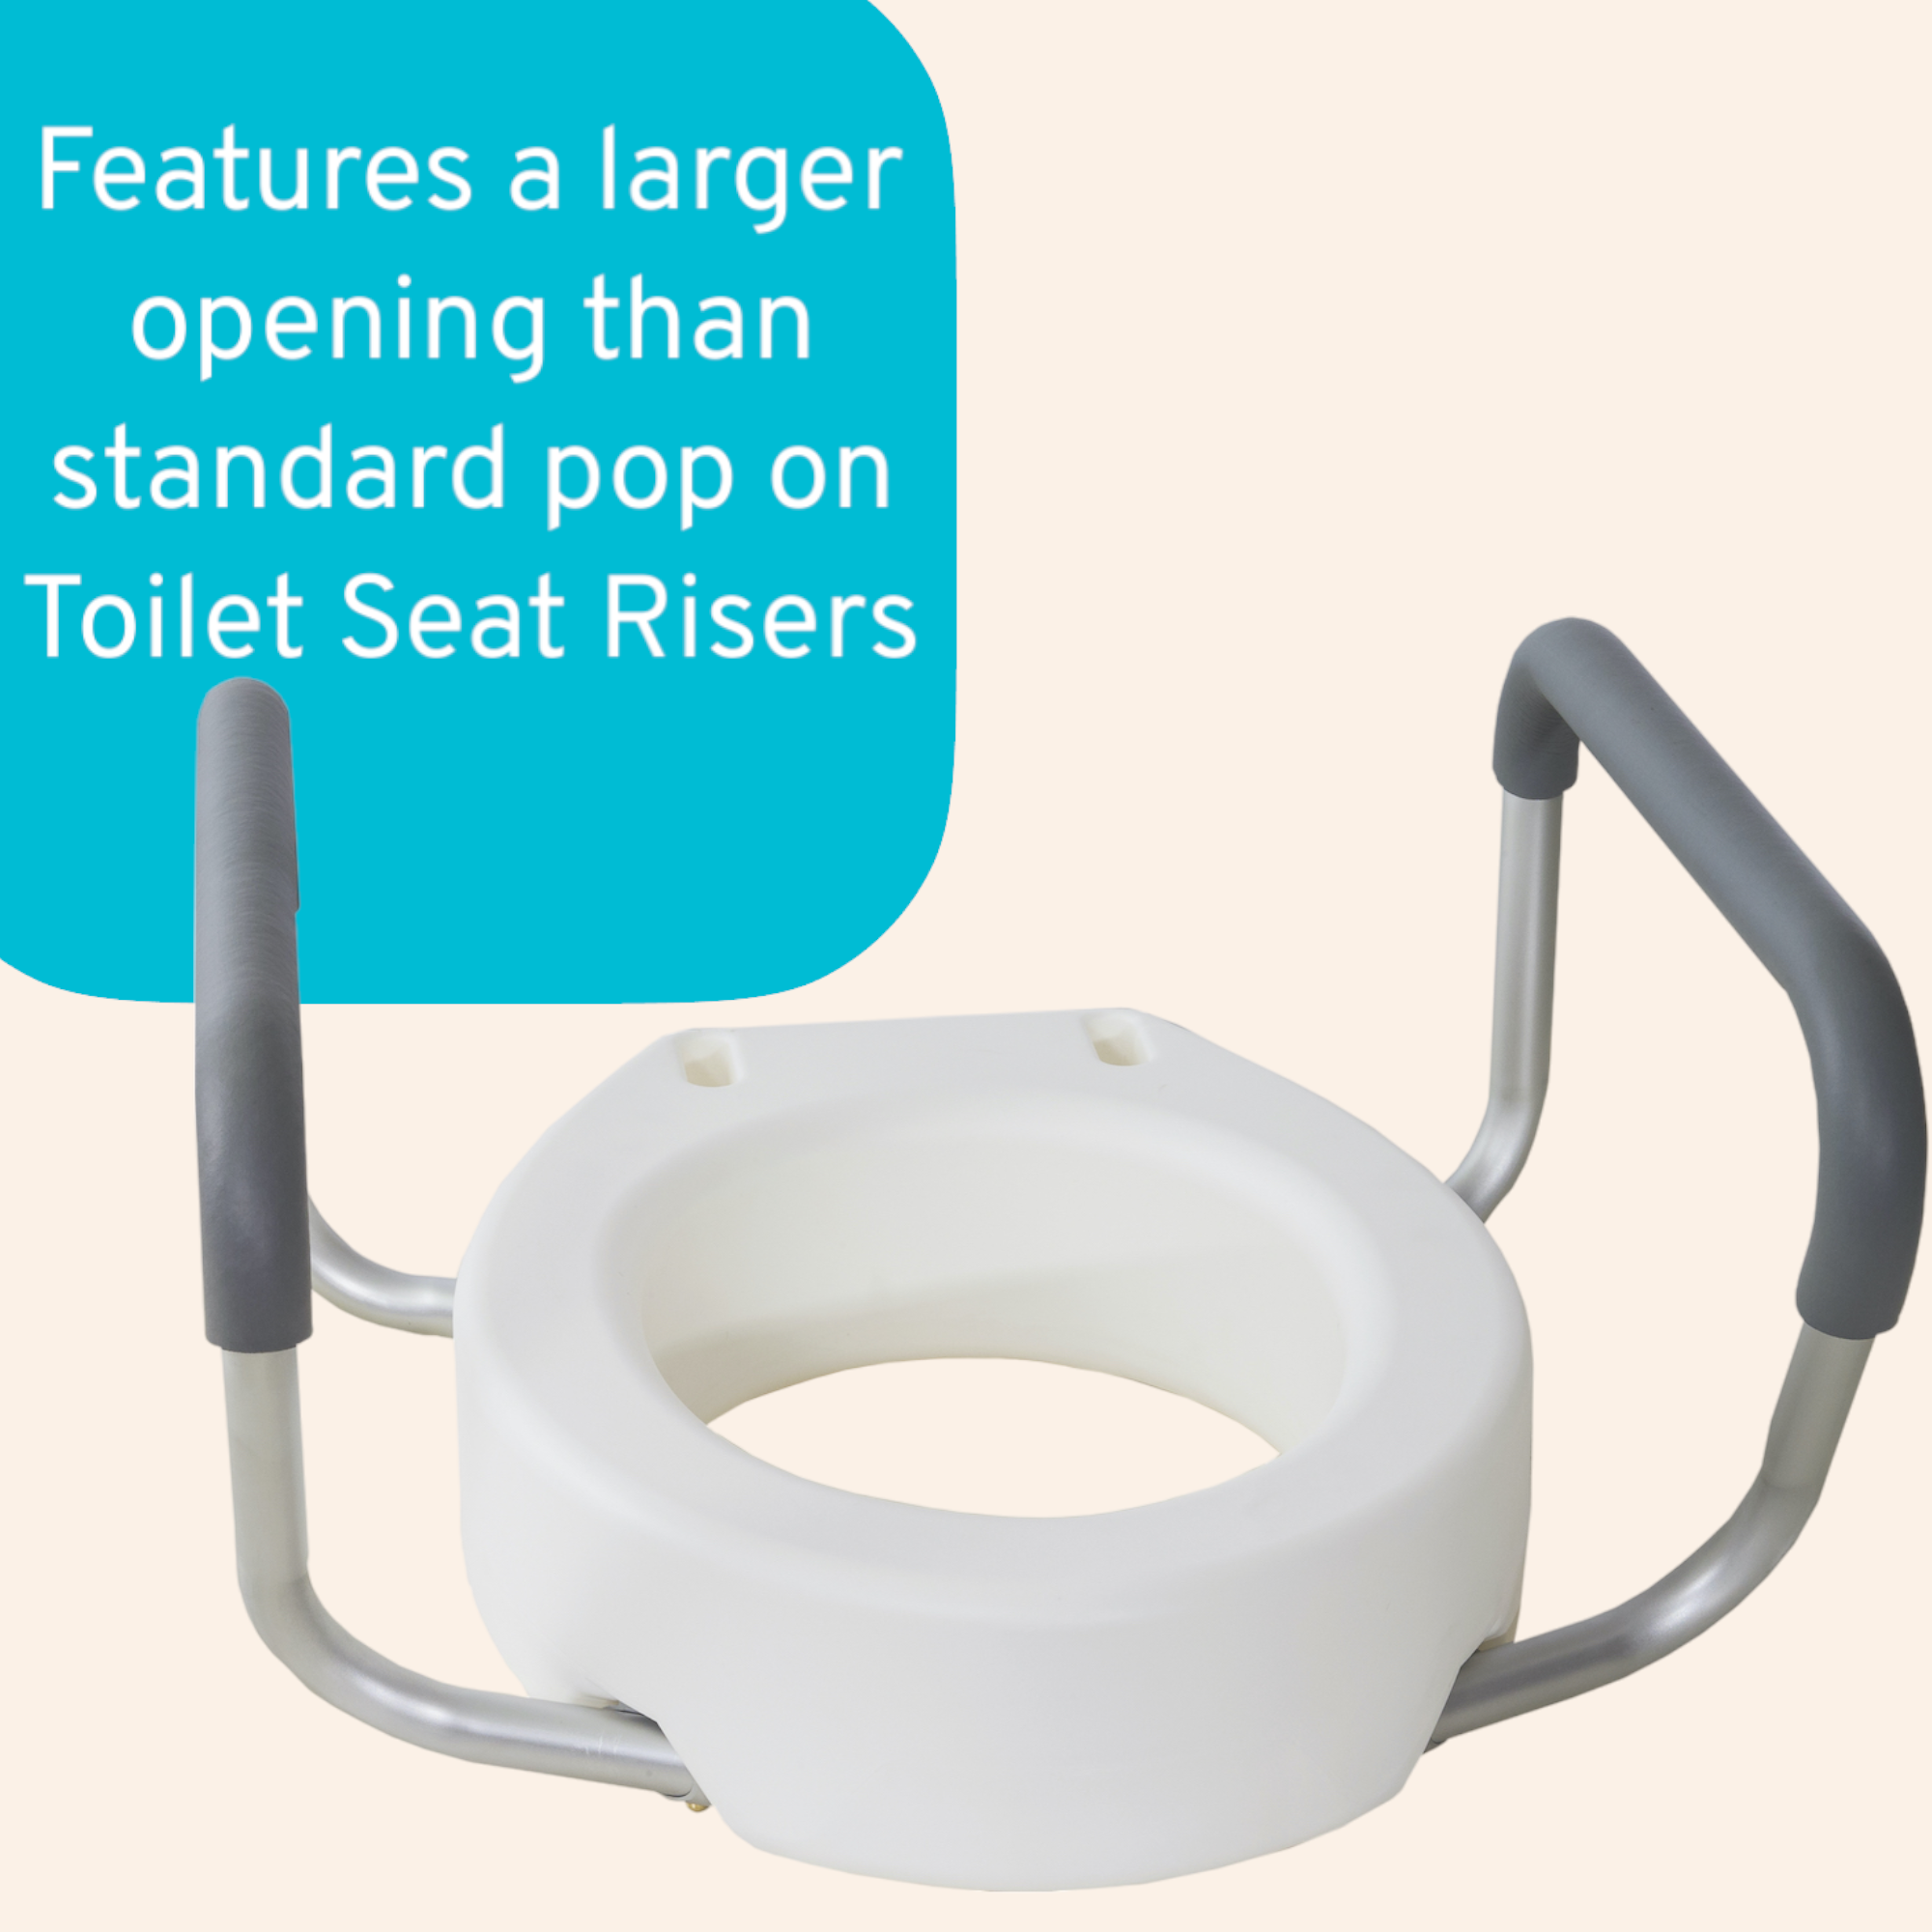 Essential Medical Supply Raised Elevated Toilet Seat Riser for a Standard Round Bowl with Padded Aluminum Arms for Support and Compatible with Existing Seat - image 4 of 8